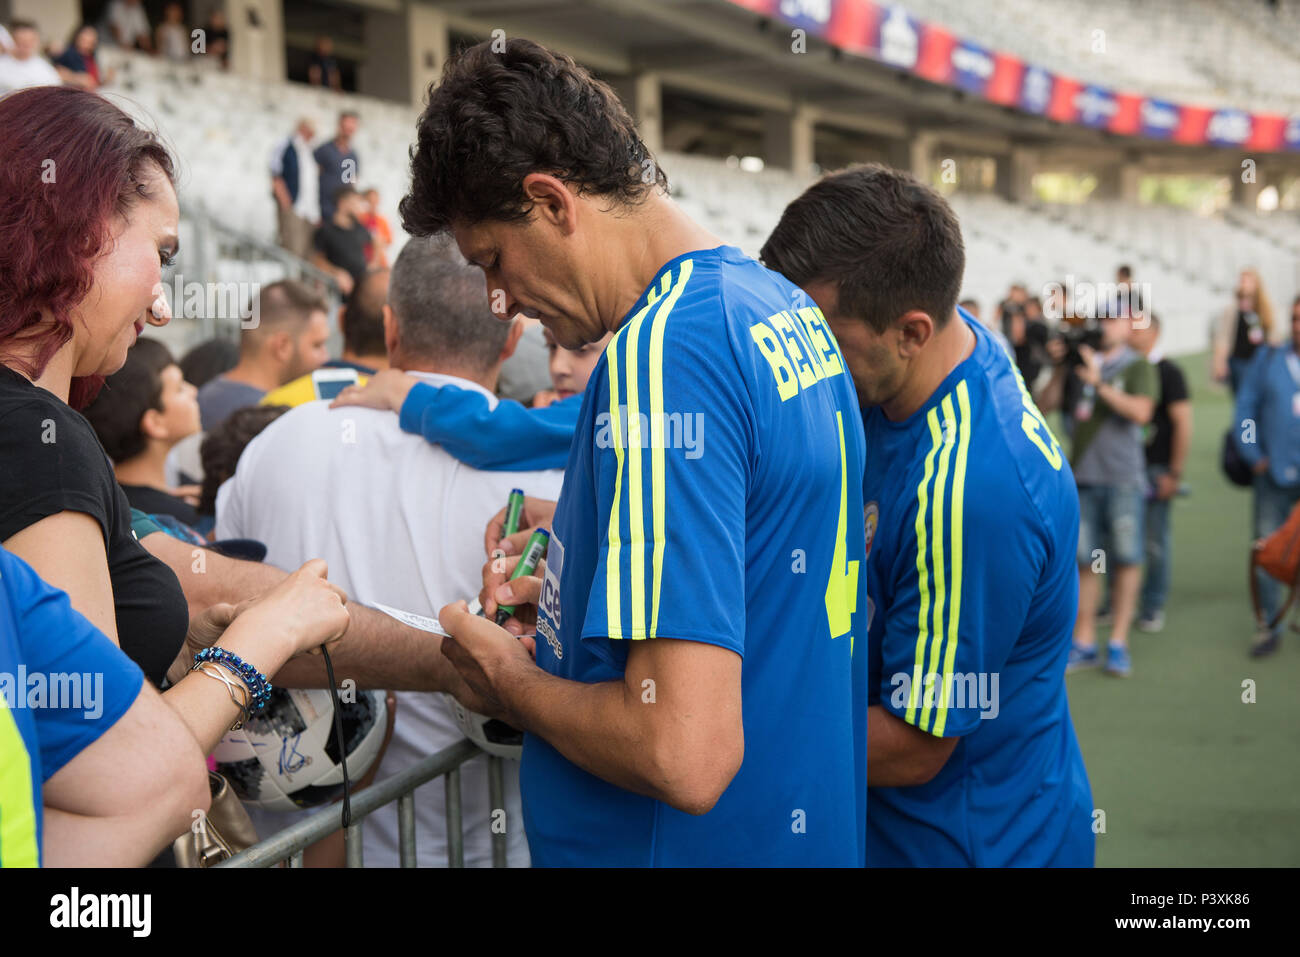 CLUJ NAPOCA, ROMANIA - JUNE 15, 2018: Football player Miodrag Belodedici from the Golden Team signing autographs during a match against Barcelona Lege Stock Photo